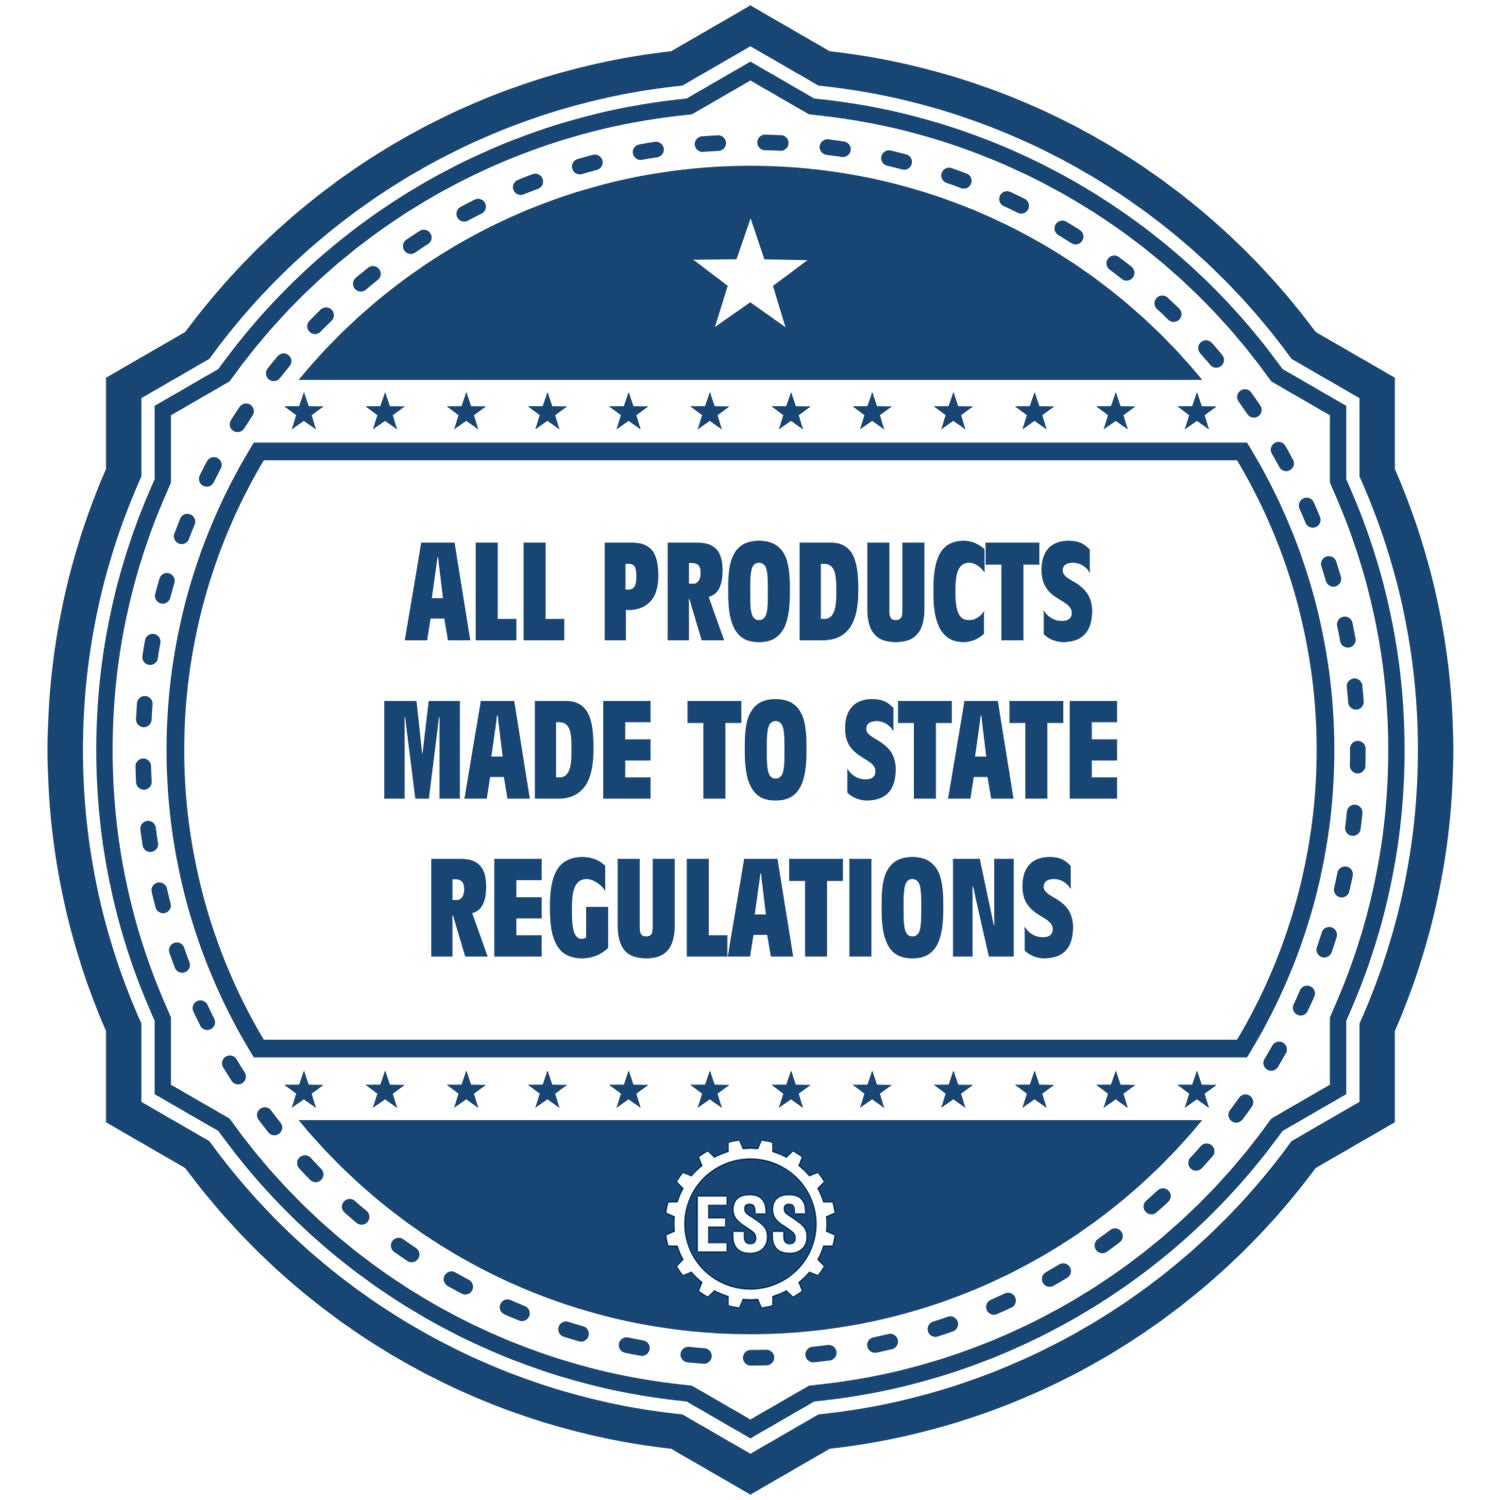 An icon or badge element for the Heavy Duty Connecticut Landscape Architect Cast Iron Embosser showing that this product is made in compliance with state regulations.